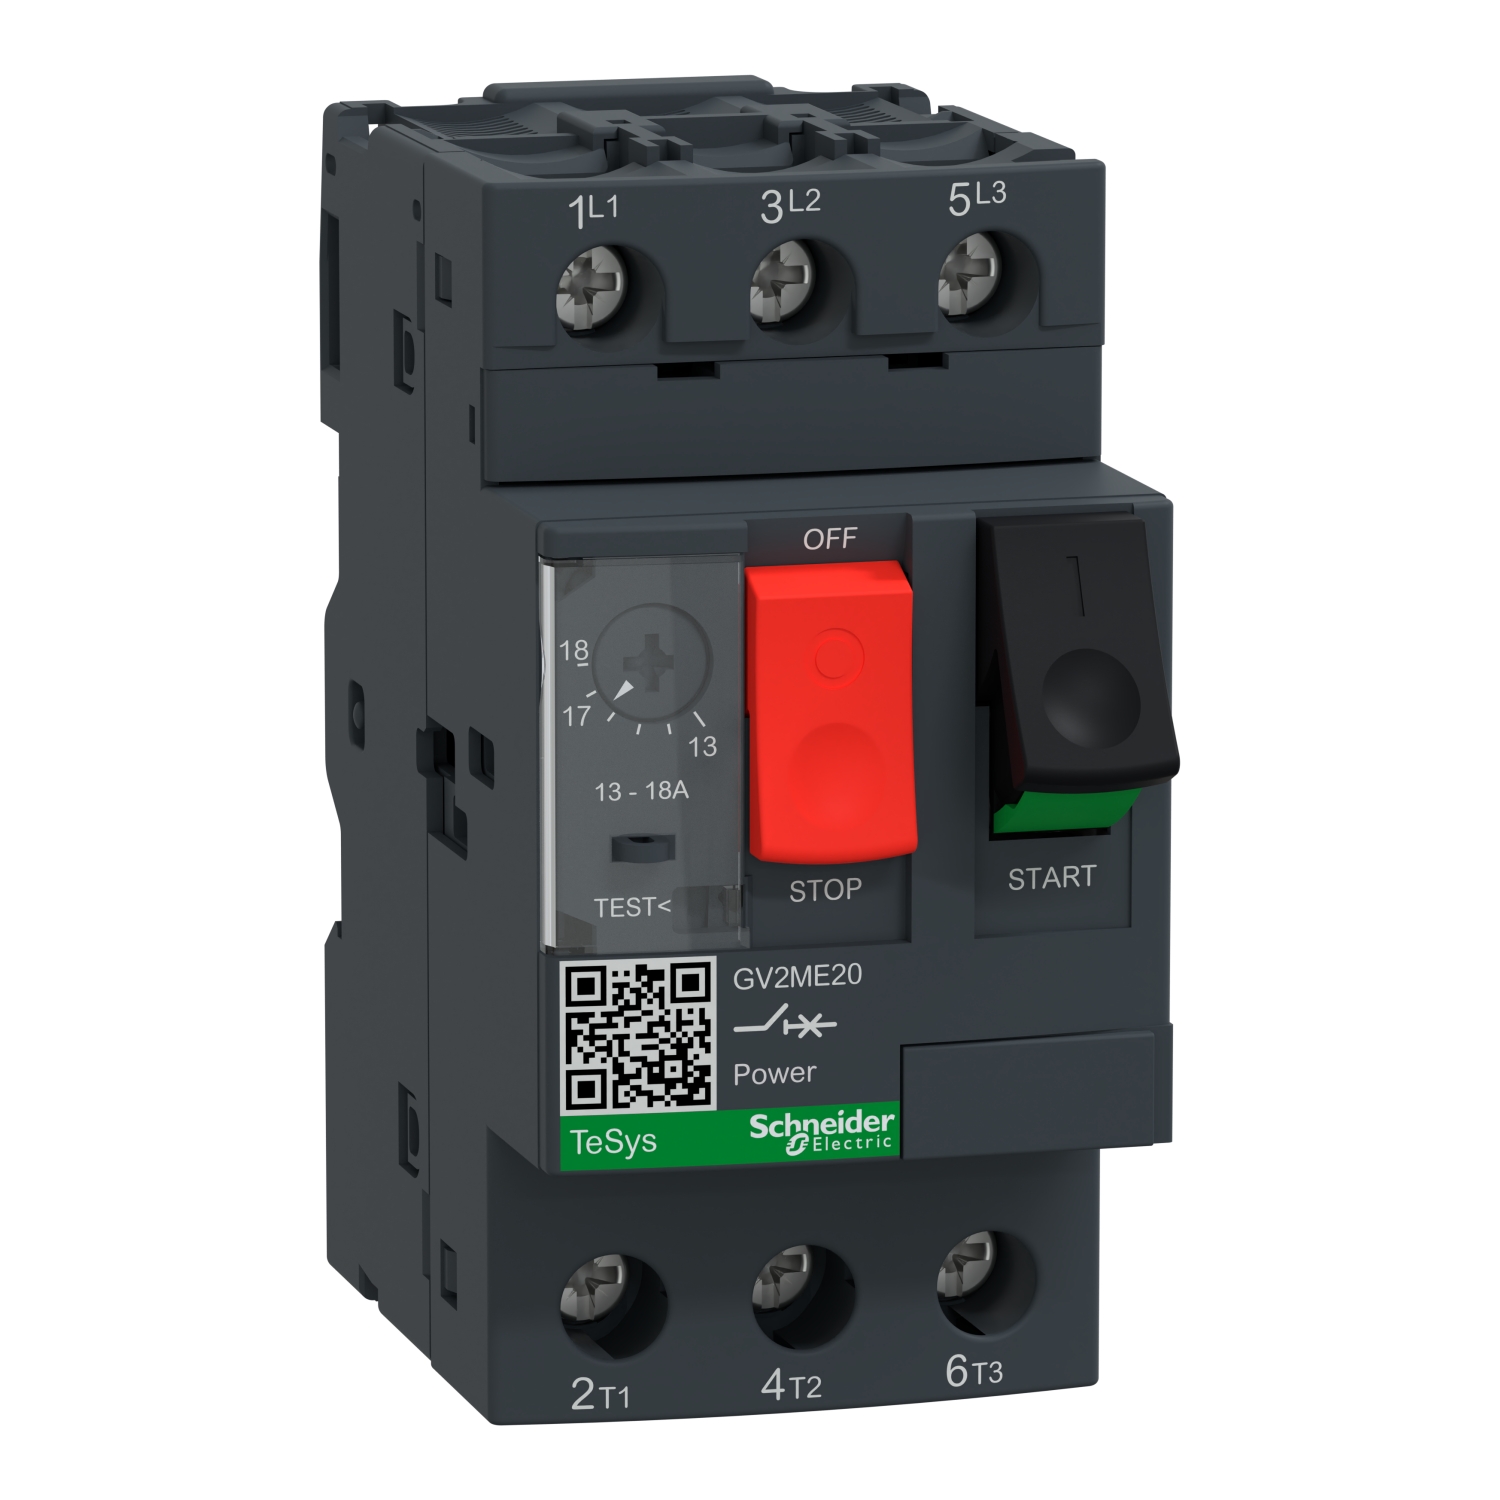 Motor circuit breaker, TeSys Deca, 3P, 13 to 18A, thermal magnetic, screw clamp terminals, button control